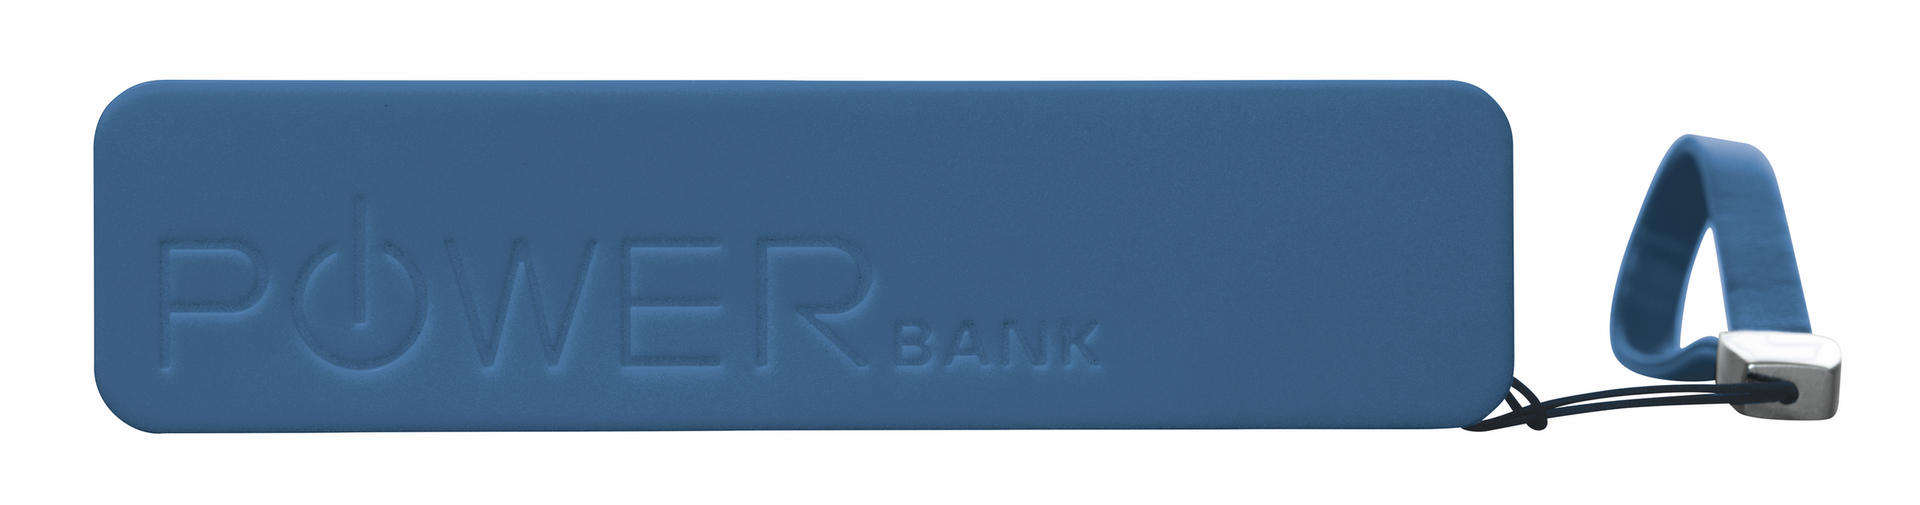 PowerBank Portable Phone Charger - navy-Top